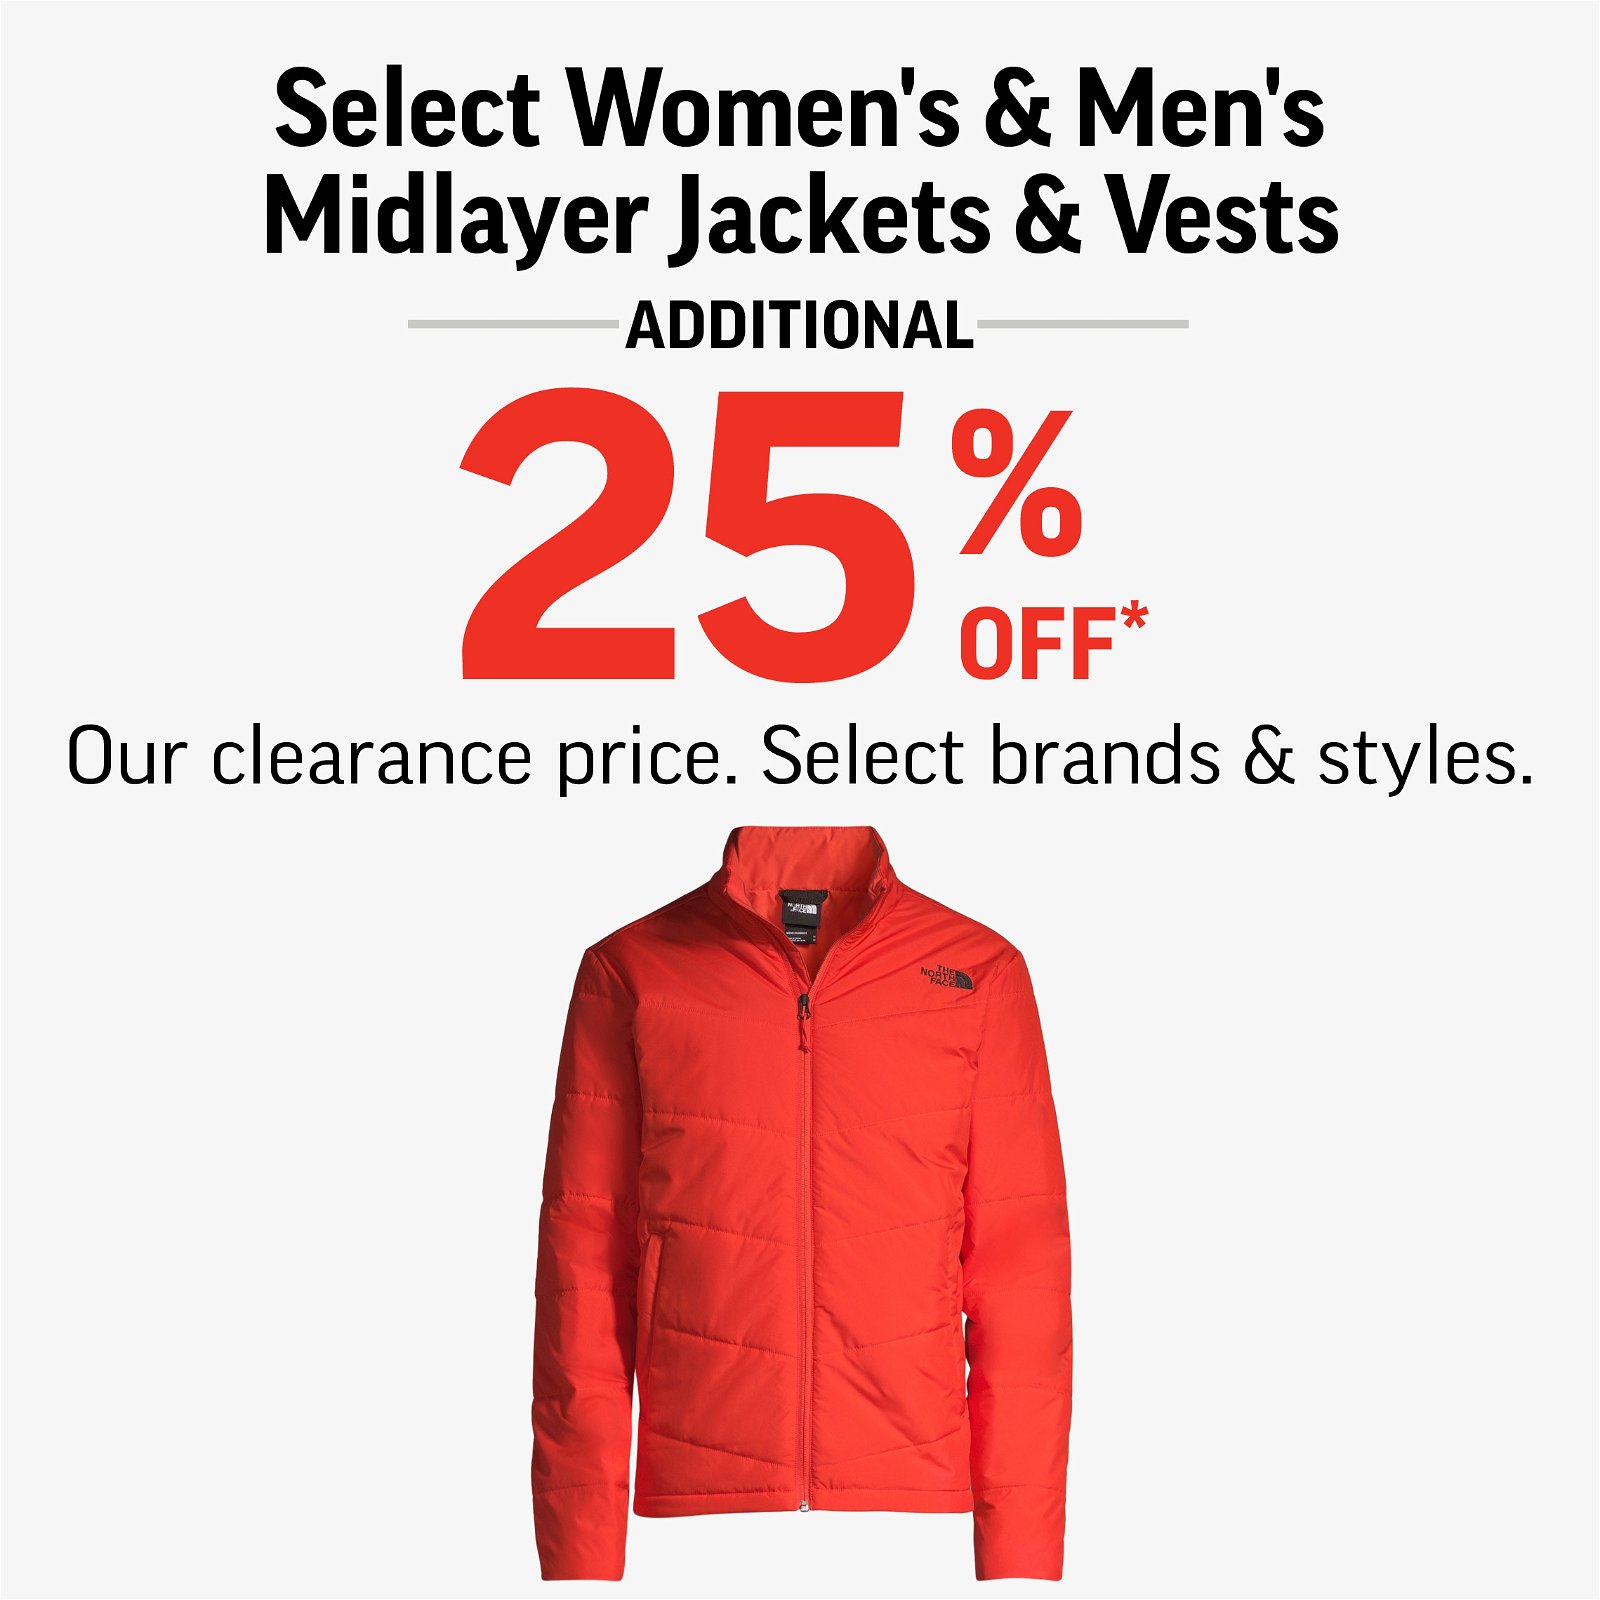 WOMEN'S & MEN'S MIDLAYER JACKETS & VESTS TAKE AN ADDITIONAL 25% OFF